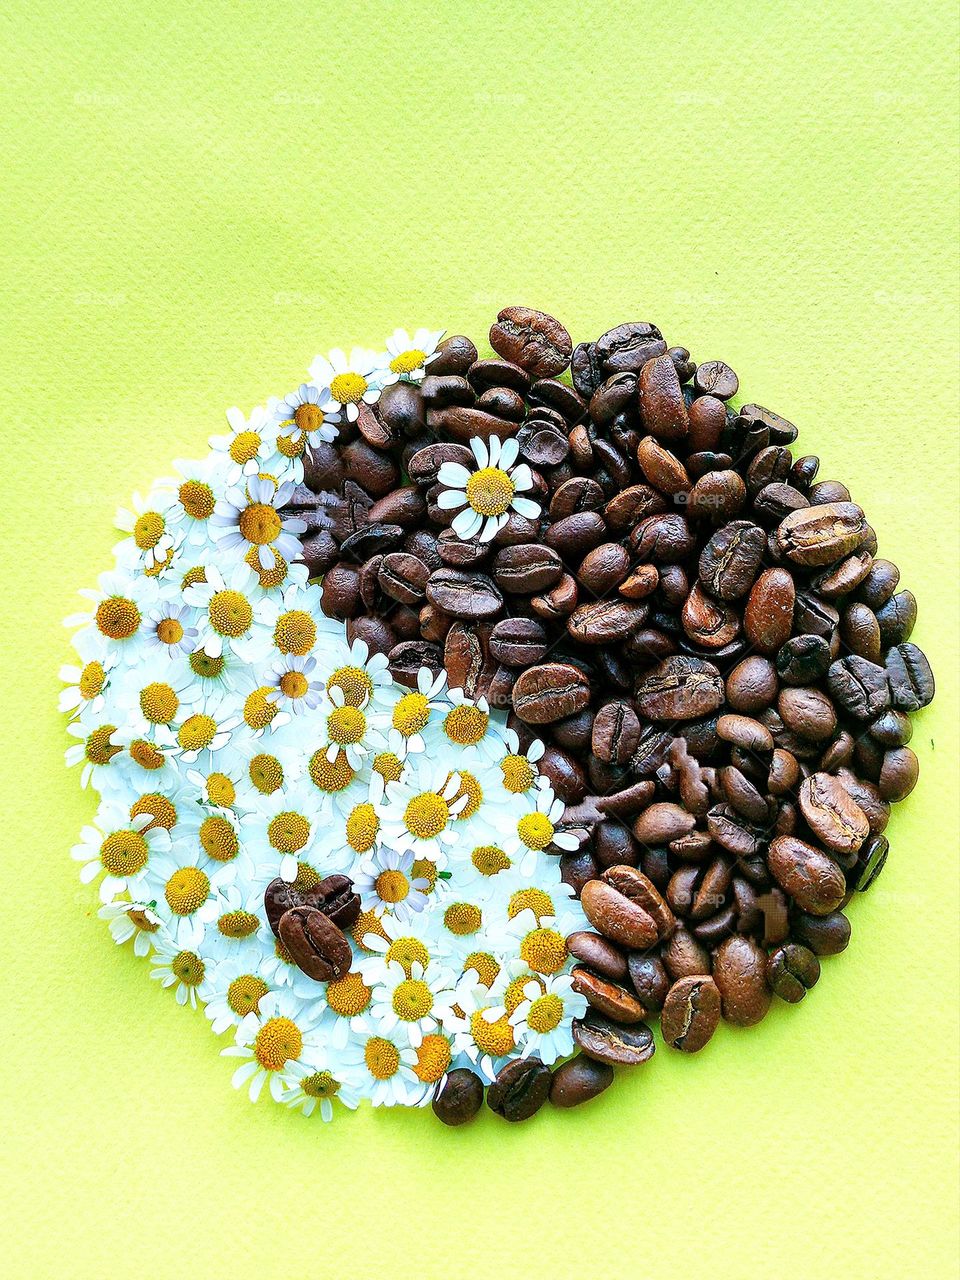 April mood. The symbol of the masculine and feminine "Yin-Yang". Coffee beans are "Yin" dark. Chamomile flowers are "Yang" light. Chinese philosophy.